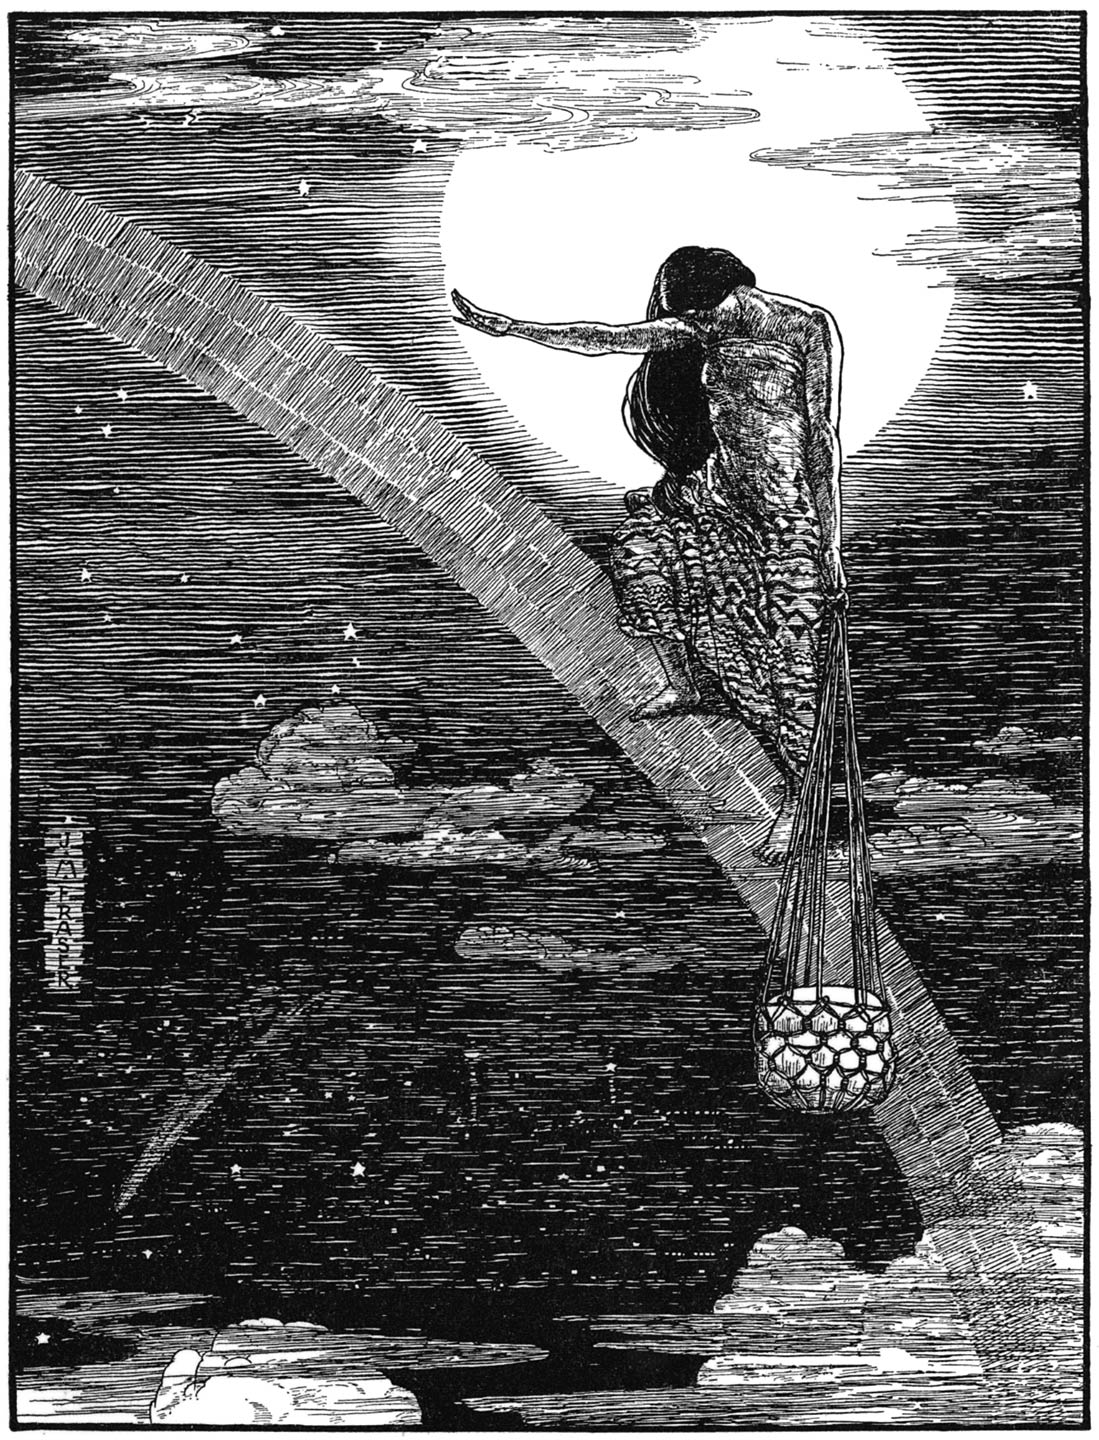 “It made an arching path for her from the rocks up to the heavens. With the net in her hands she went along that path.”